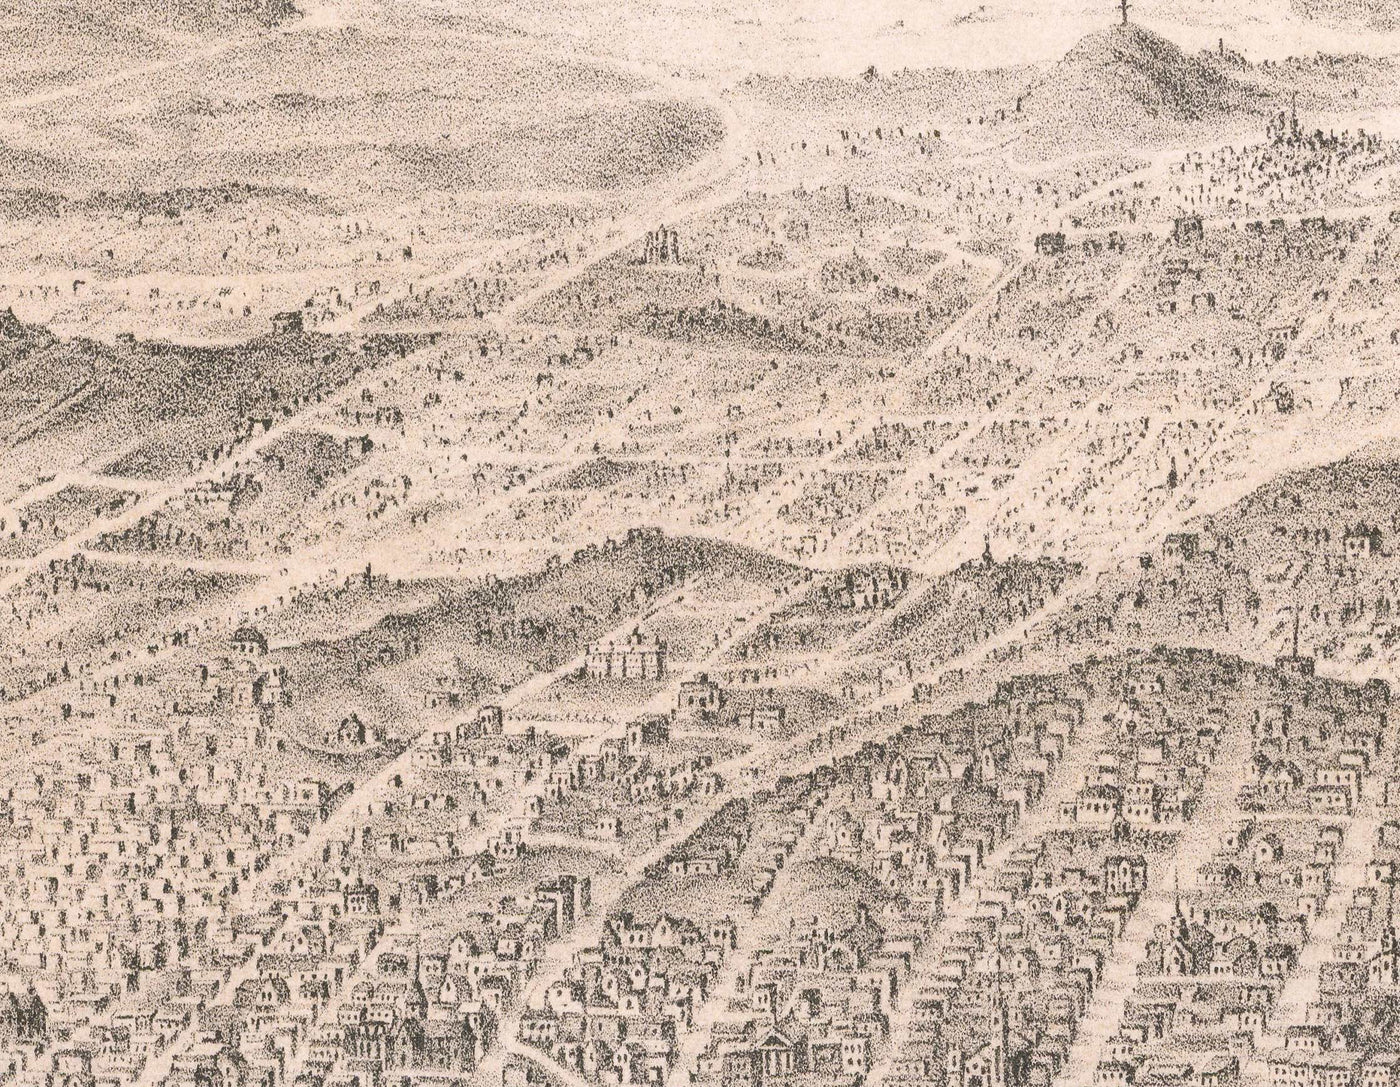 Old Birds Eye Map of San Francisco in 1868 - Bay Area, Golden Gate, Gold Rush, Nob Hill, North Beach